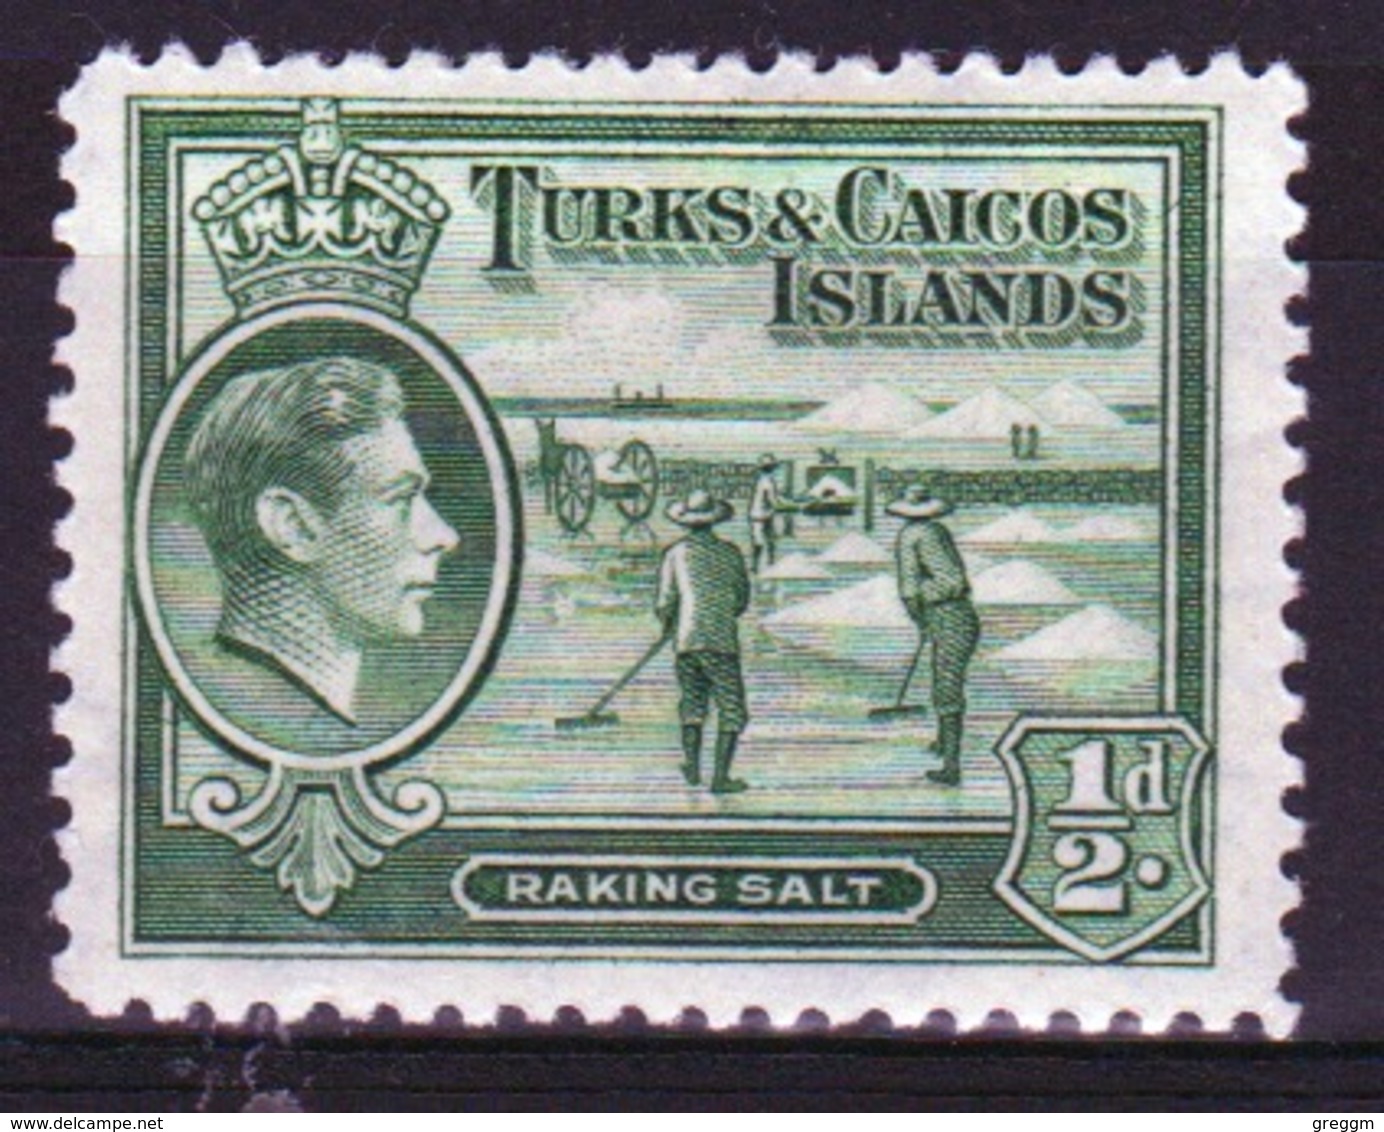 Turks And Caicos Half Penny Single Stamp From The 1938 Definitive  Set. - Turks And Caicos